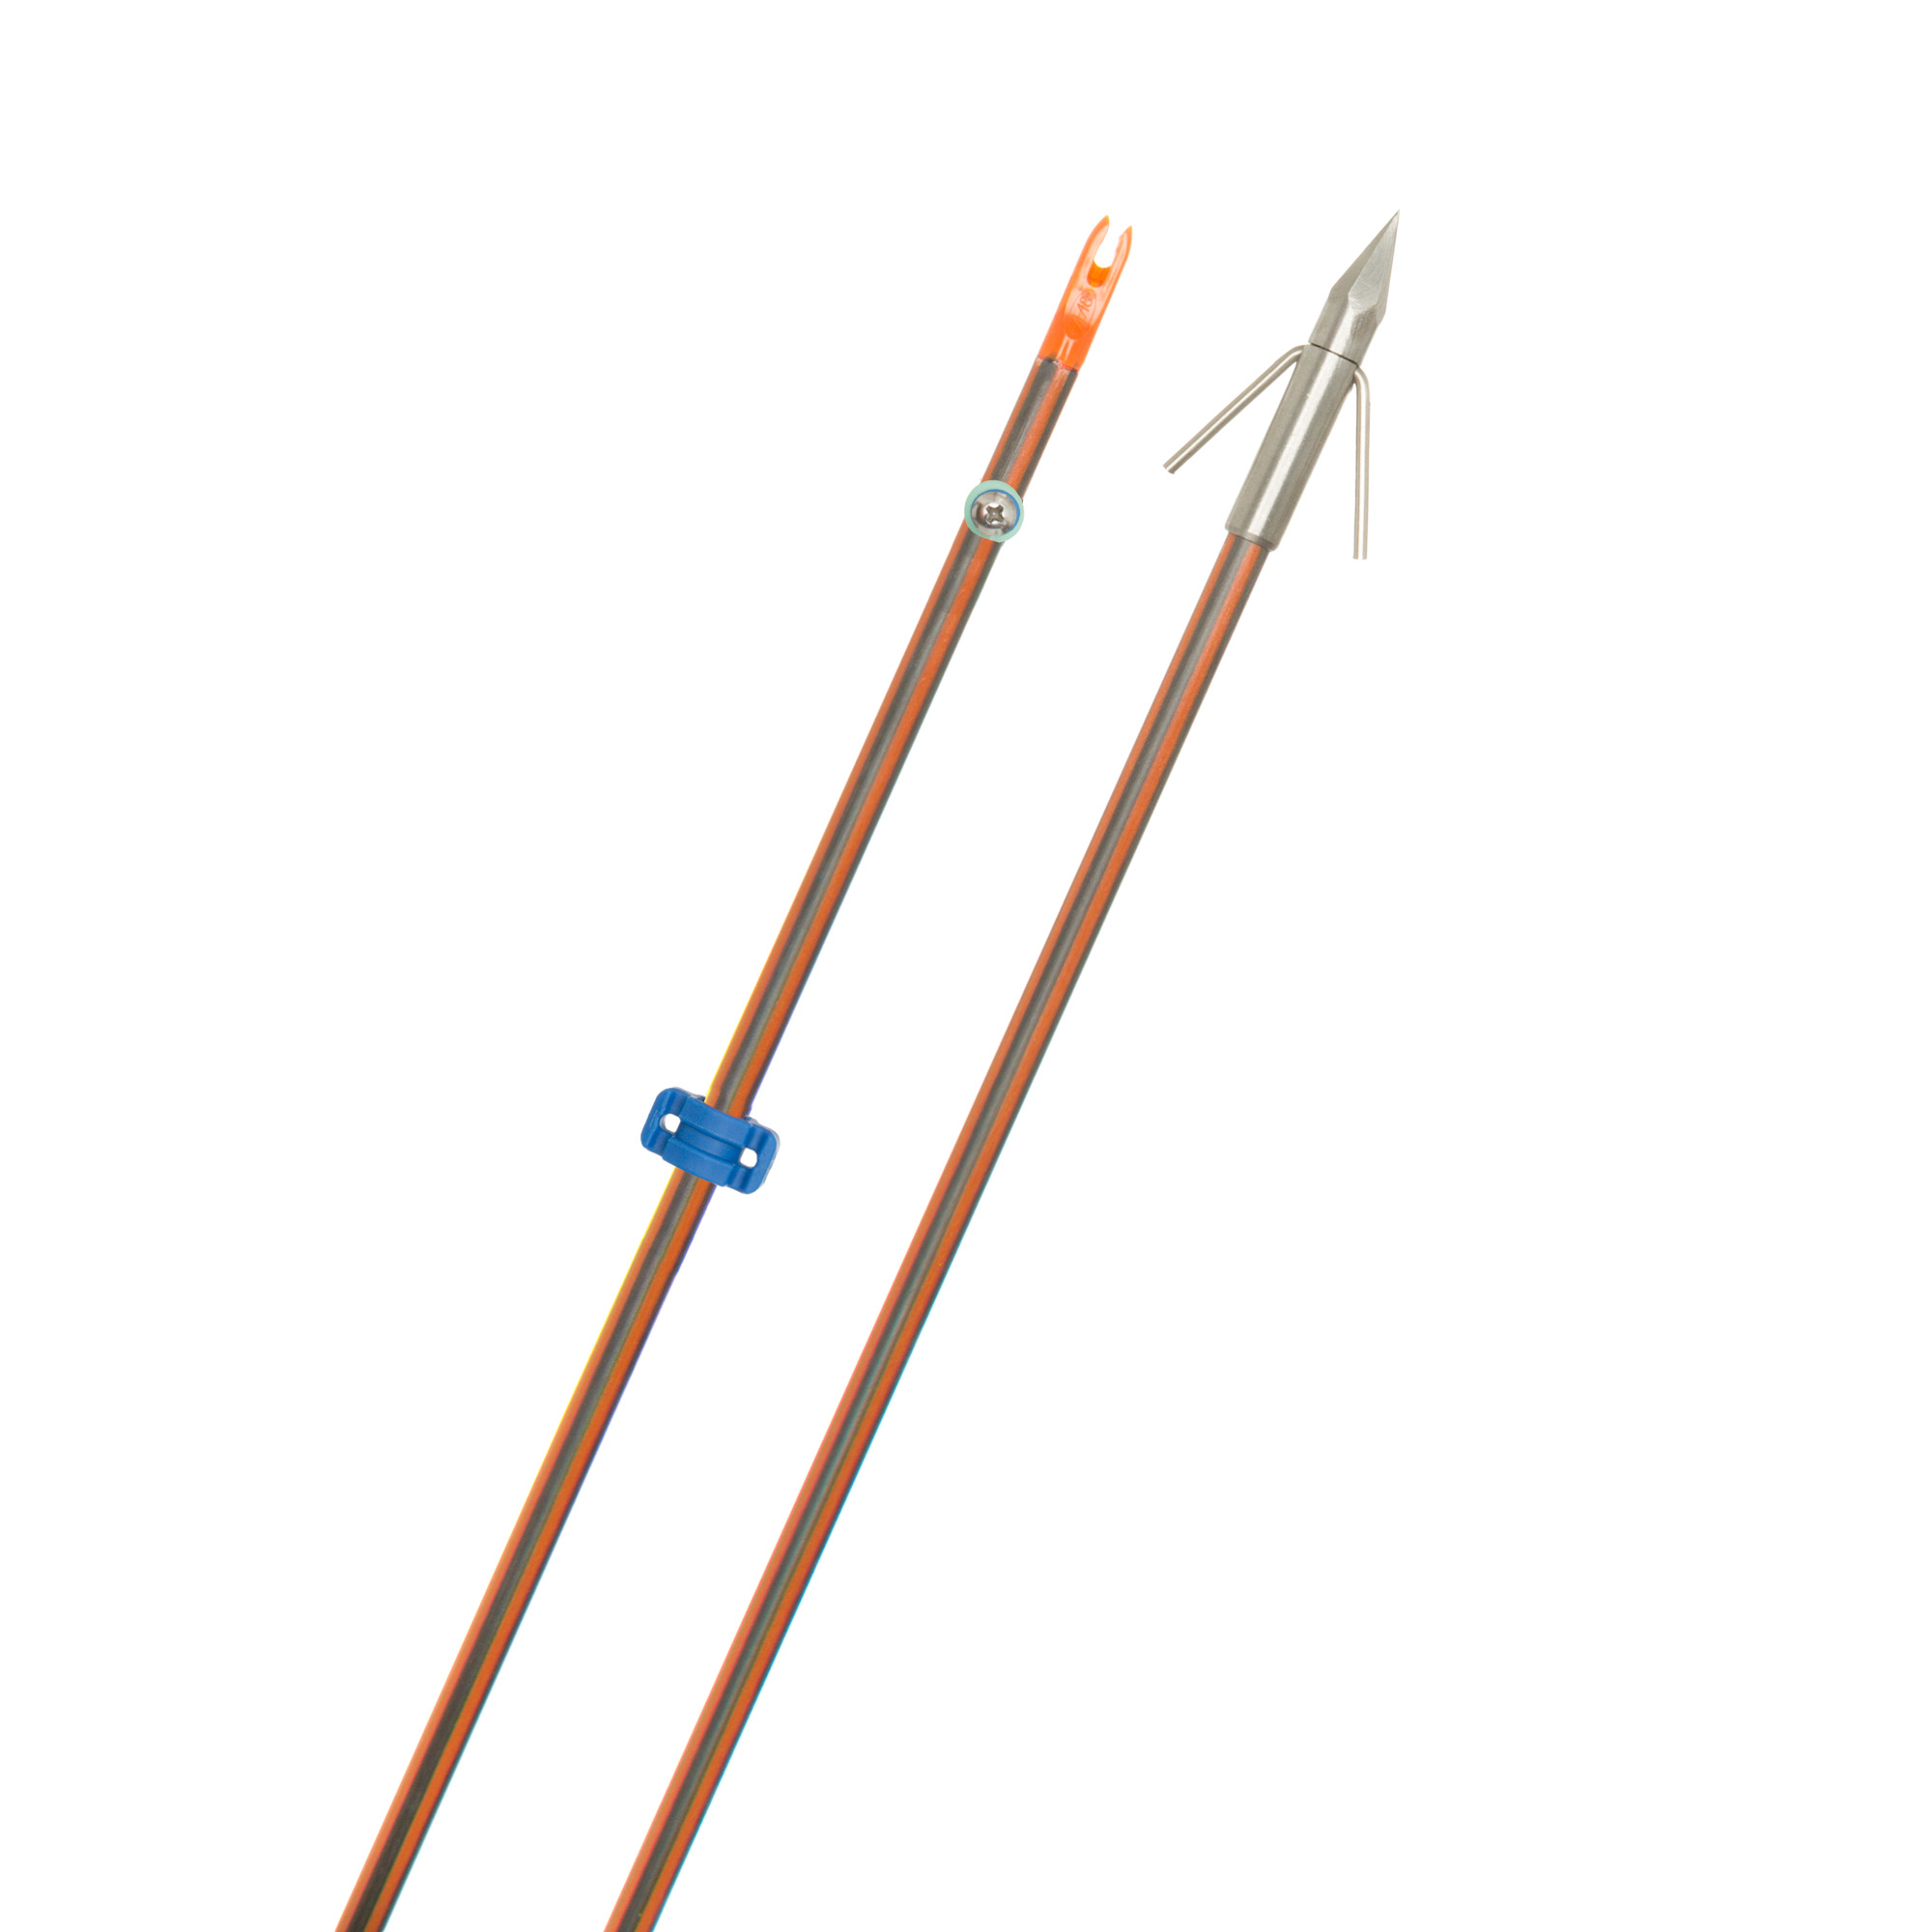 Sabre Lighted Bowfishing Arrow, Ready to Shoot